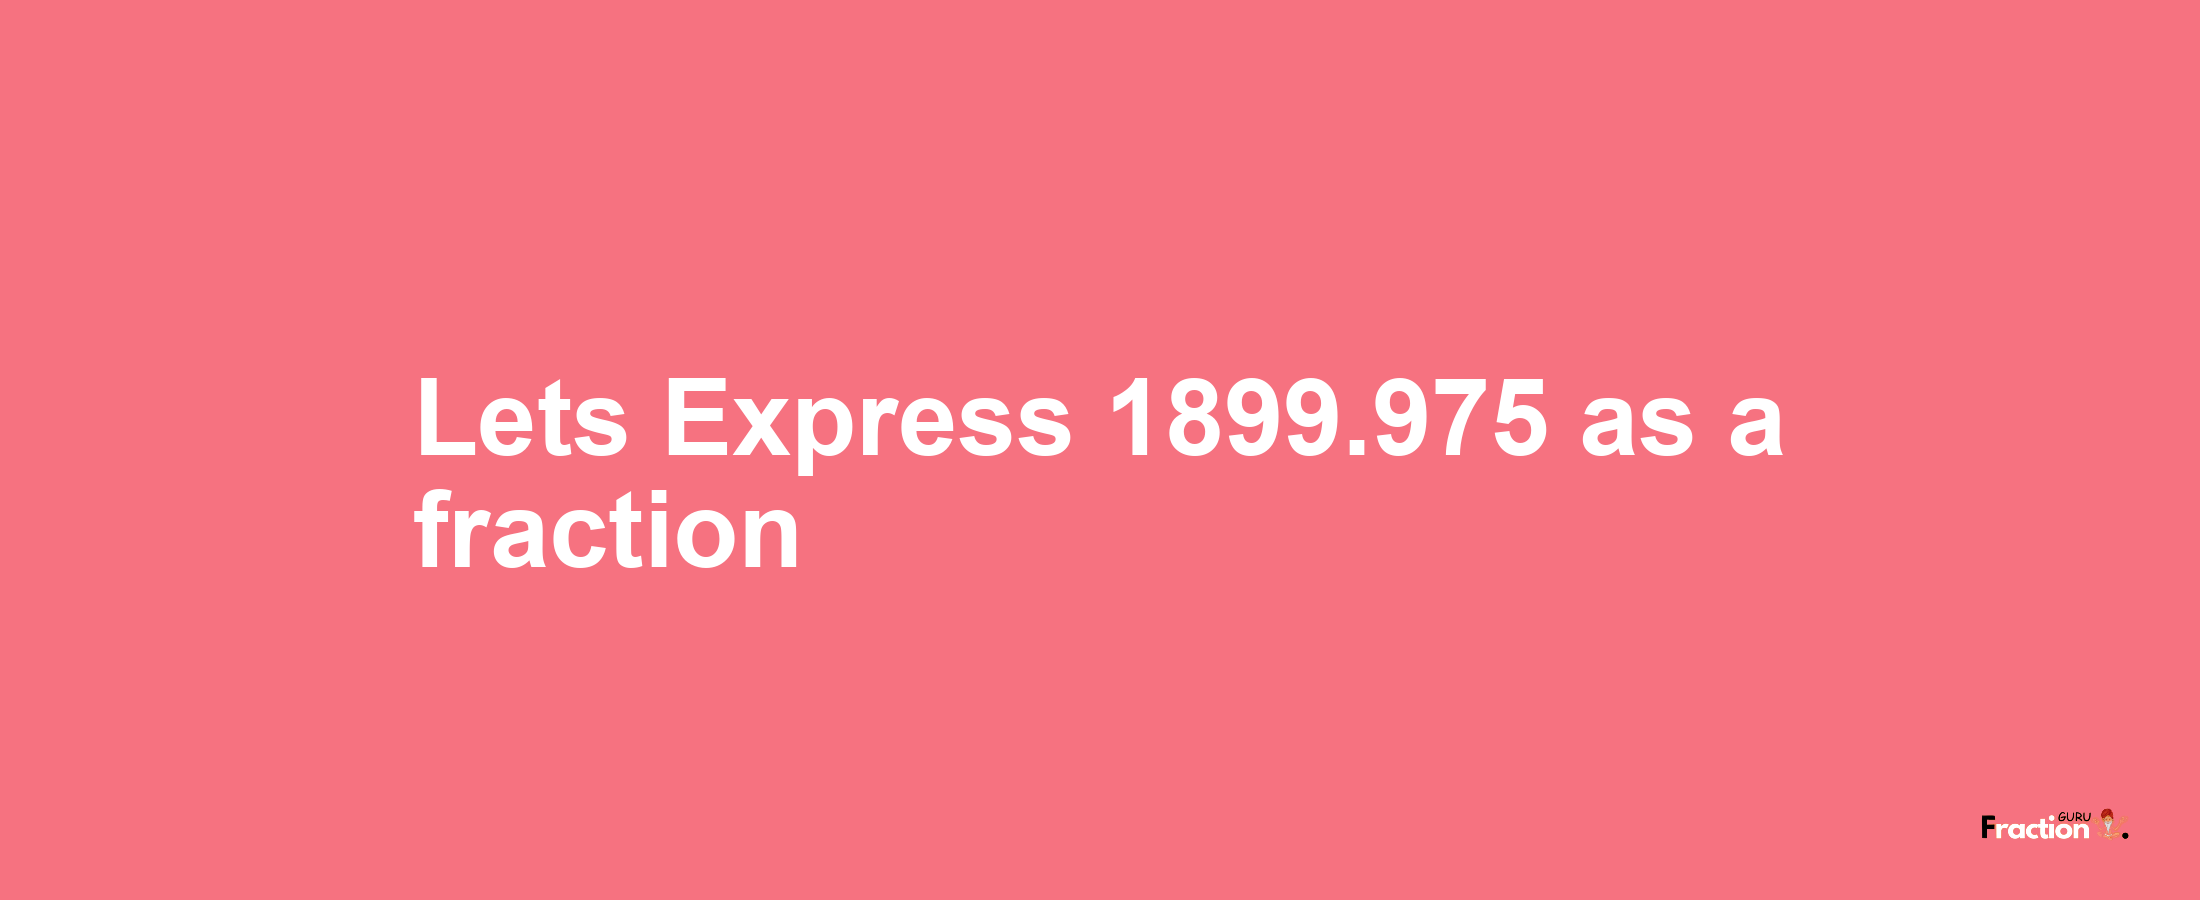 Lets Express 1899.975 as afraction